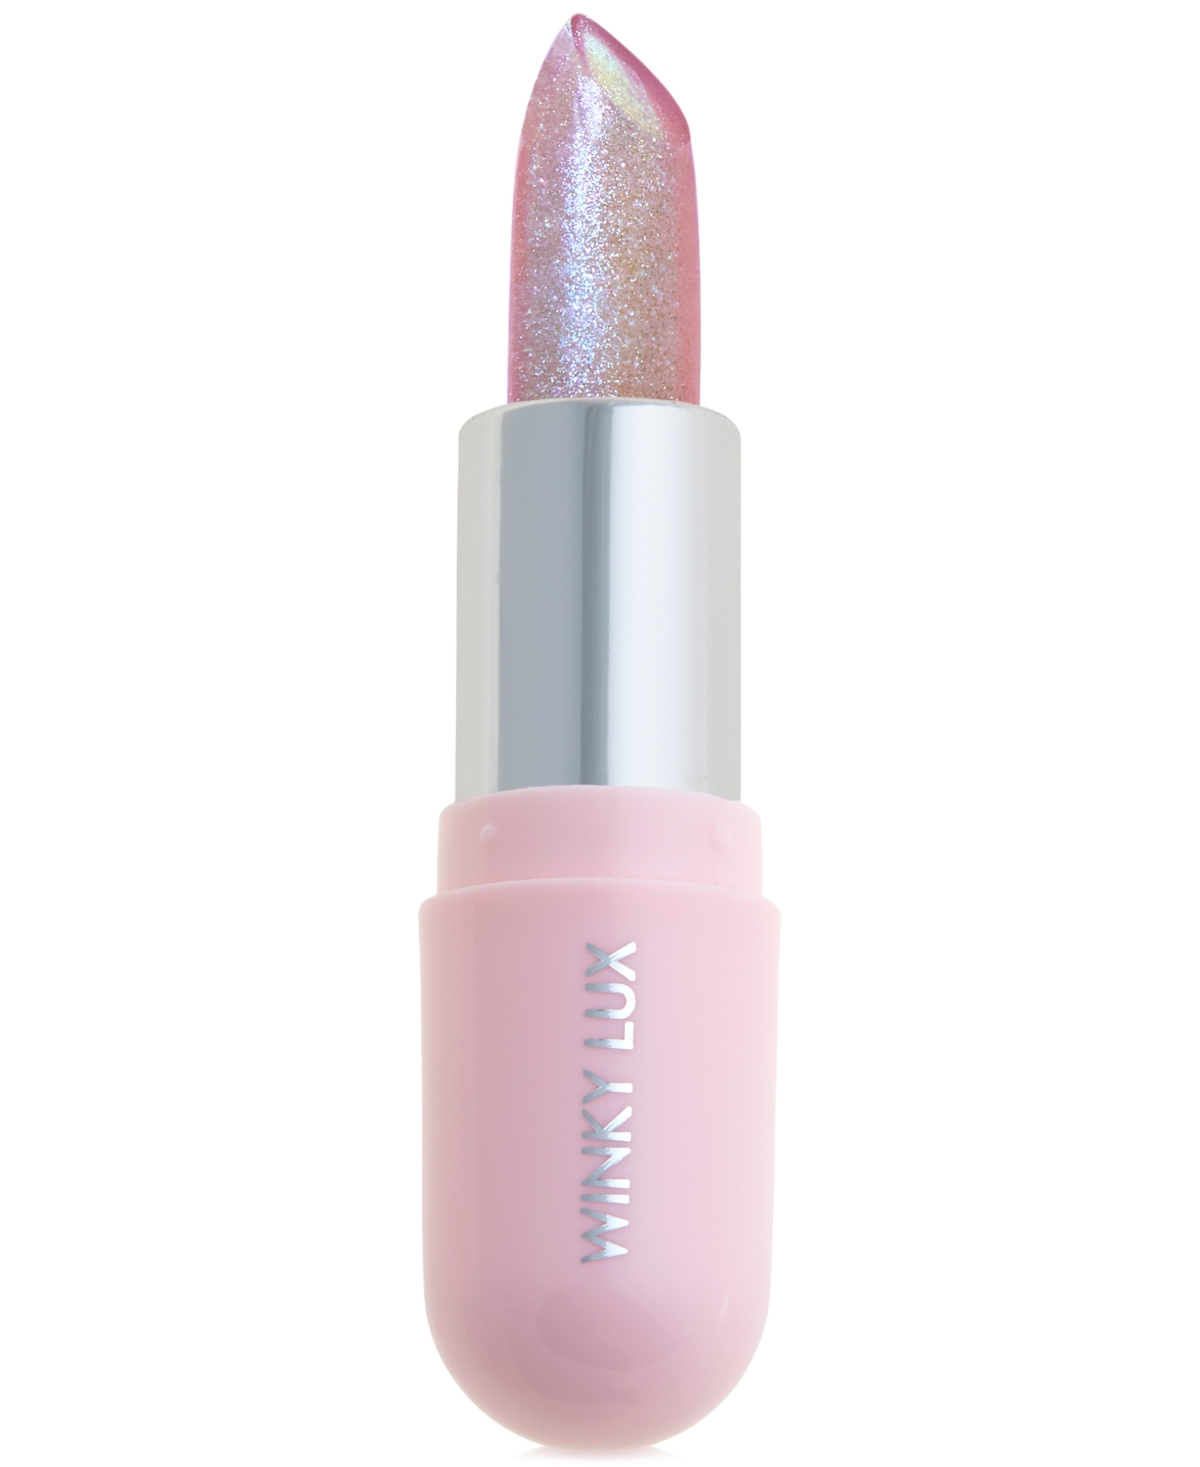 Winky Lux Glimmer Balm - Unicorn In Unicorn: Pink With Holographic Sparkle